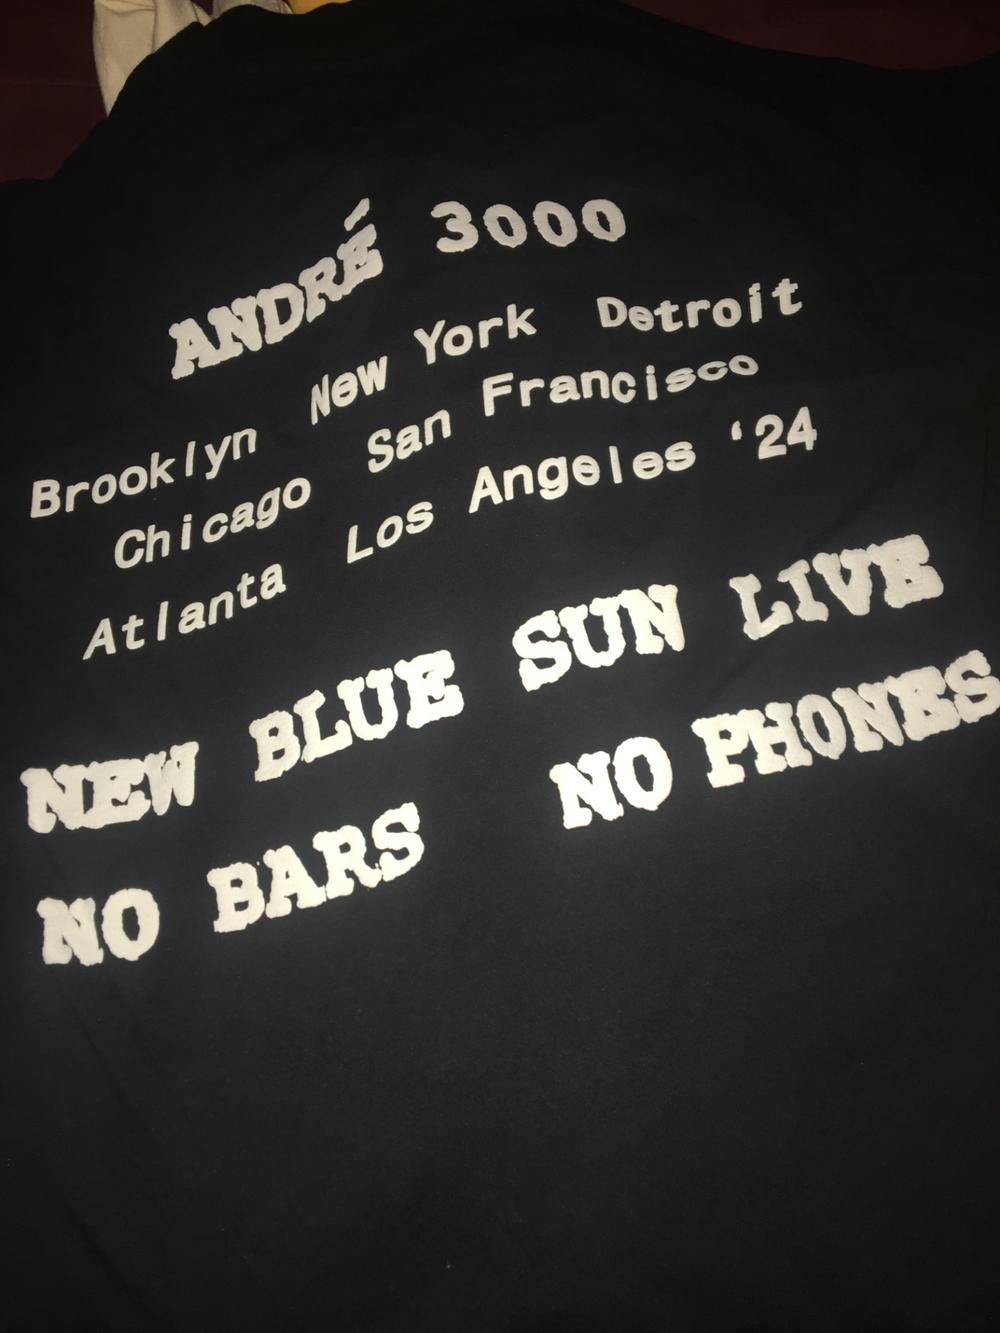 A T-shirt for sale at an Andre 3000 concert